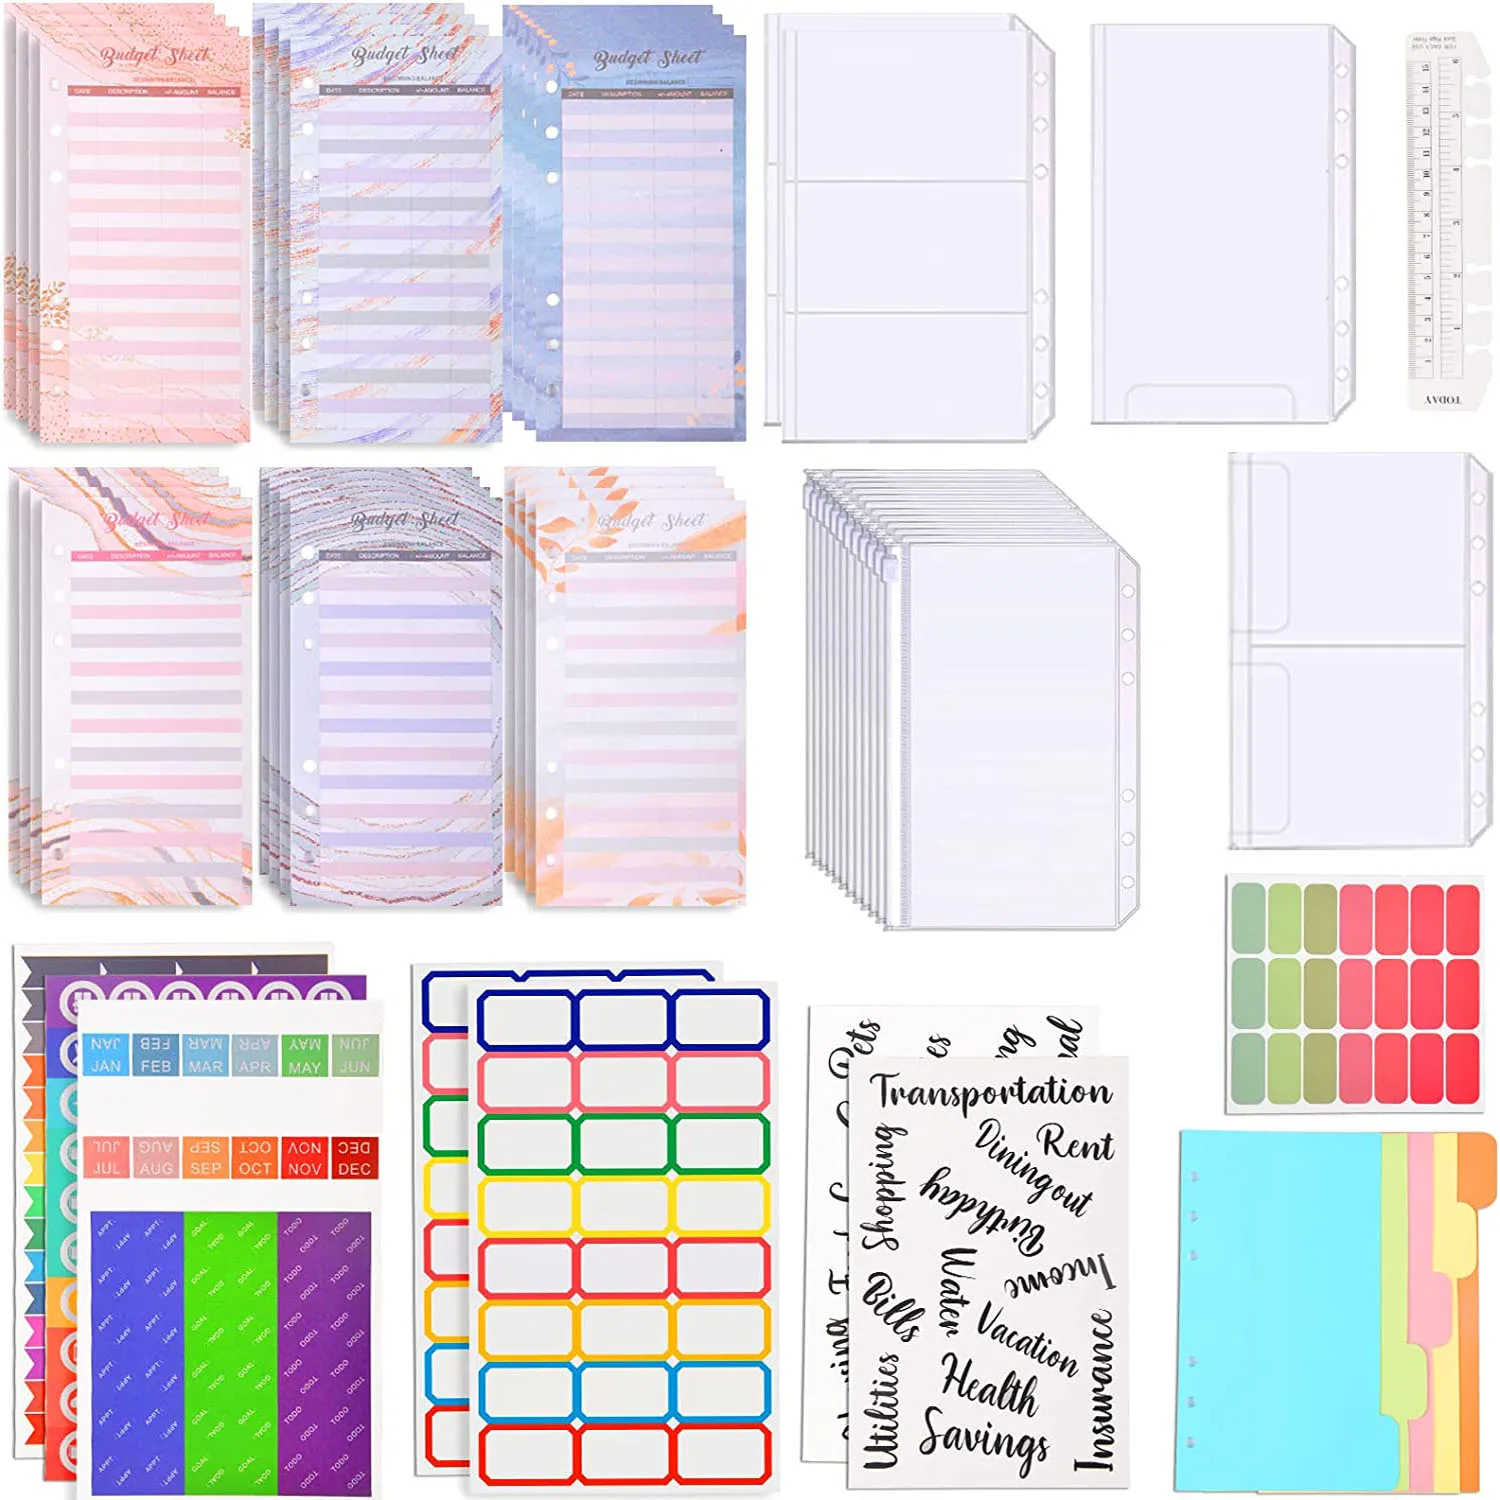 A6 Binder Budget Planner Accessories Inner Paper, Binder Pockets, Self-adhesive Label, For Financial Planning and Saving Card